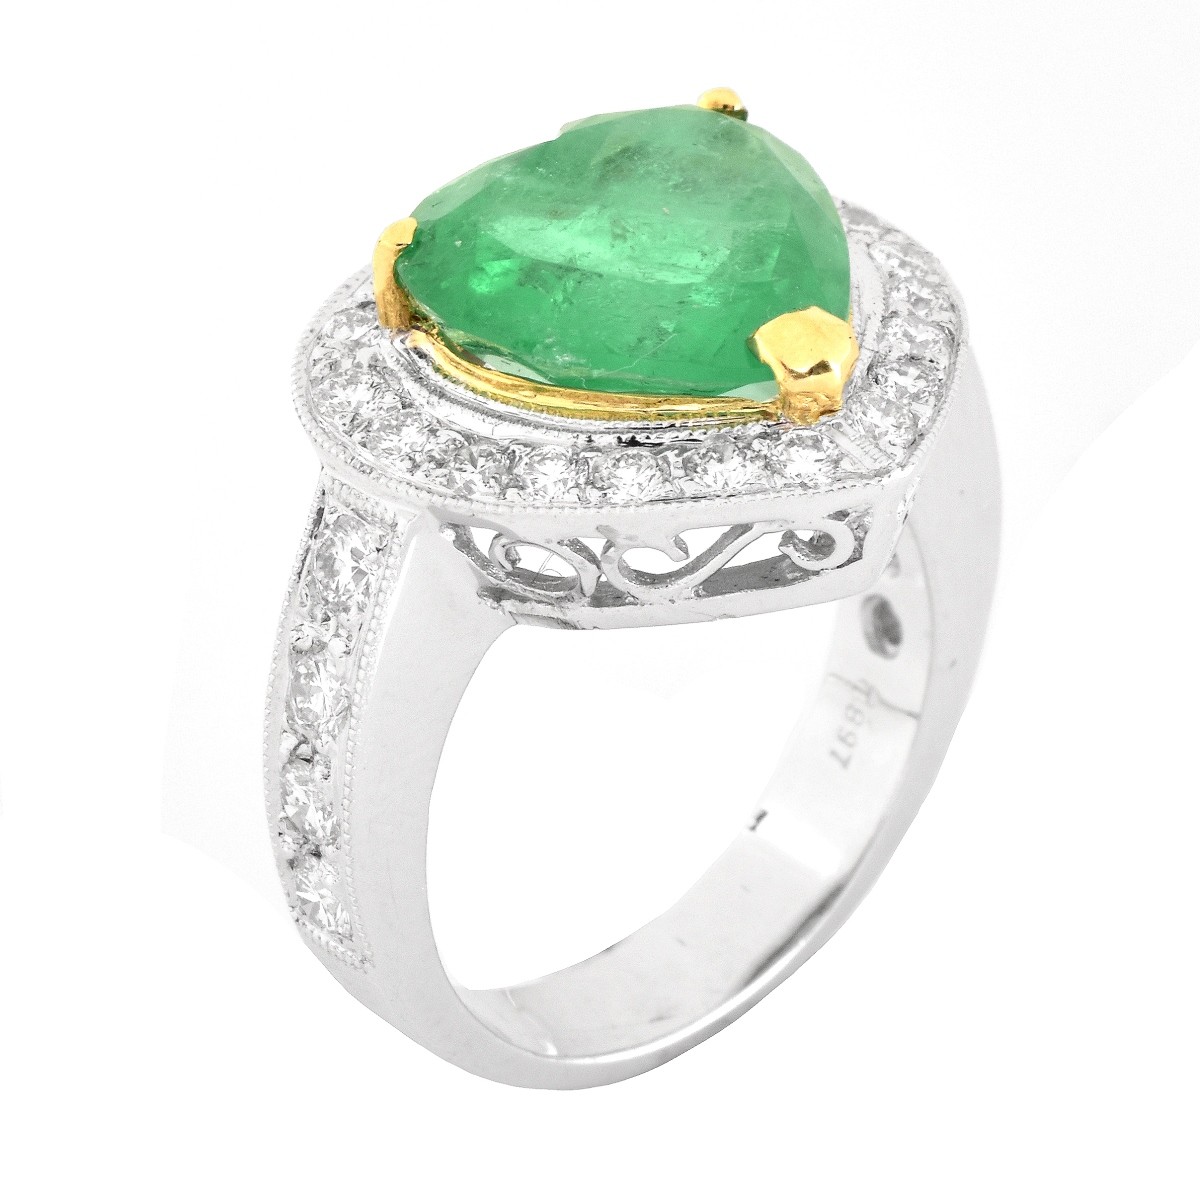 Emerald, Diamond and 18K Gold Ring